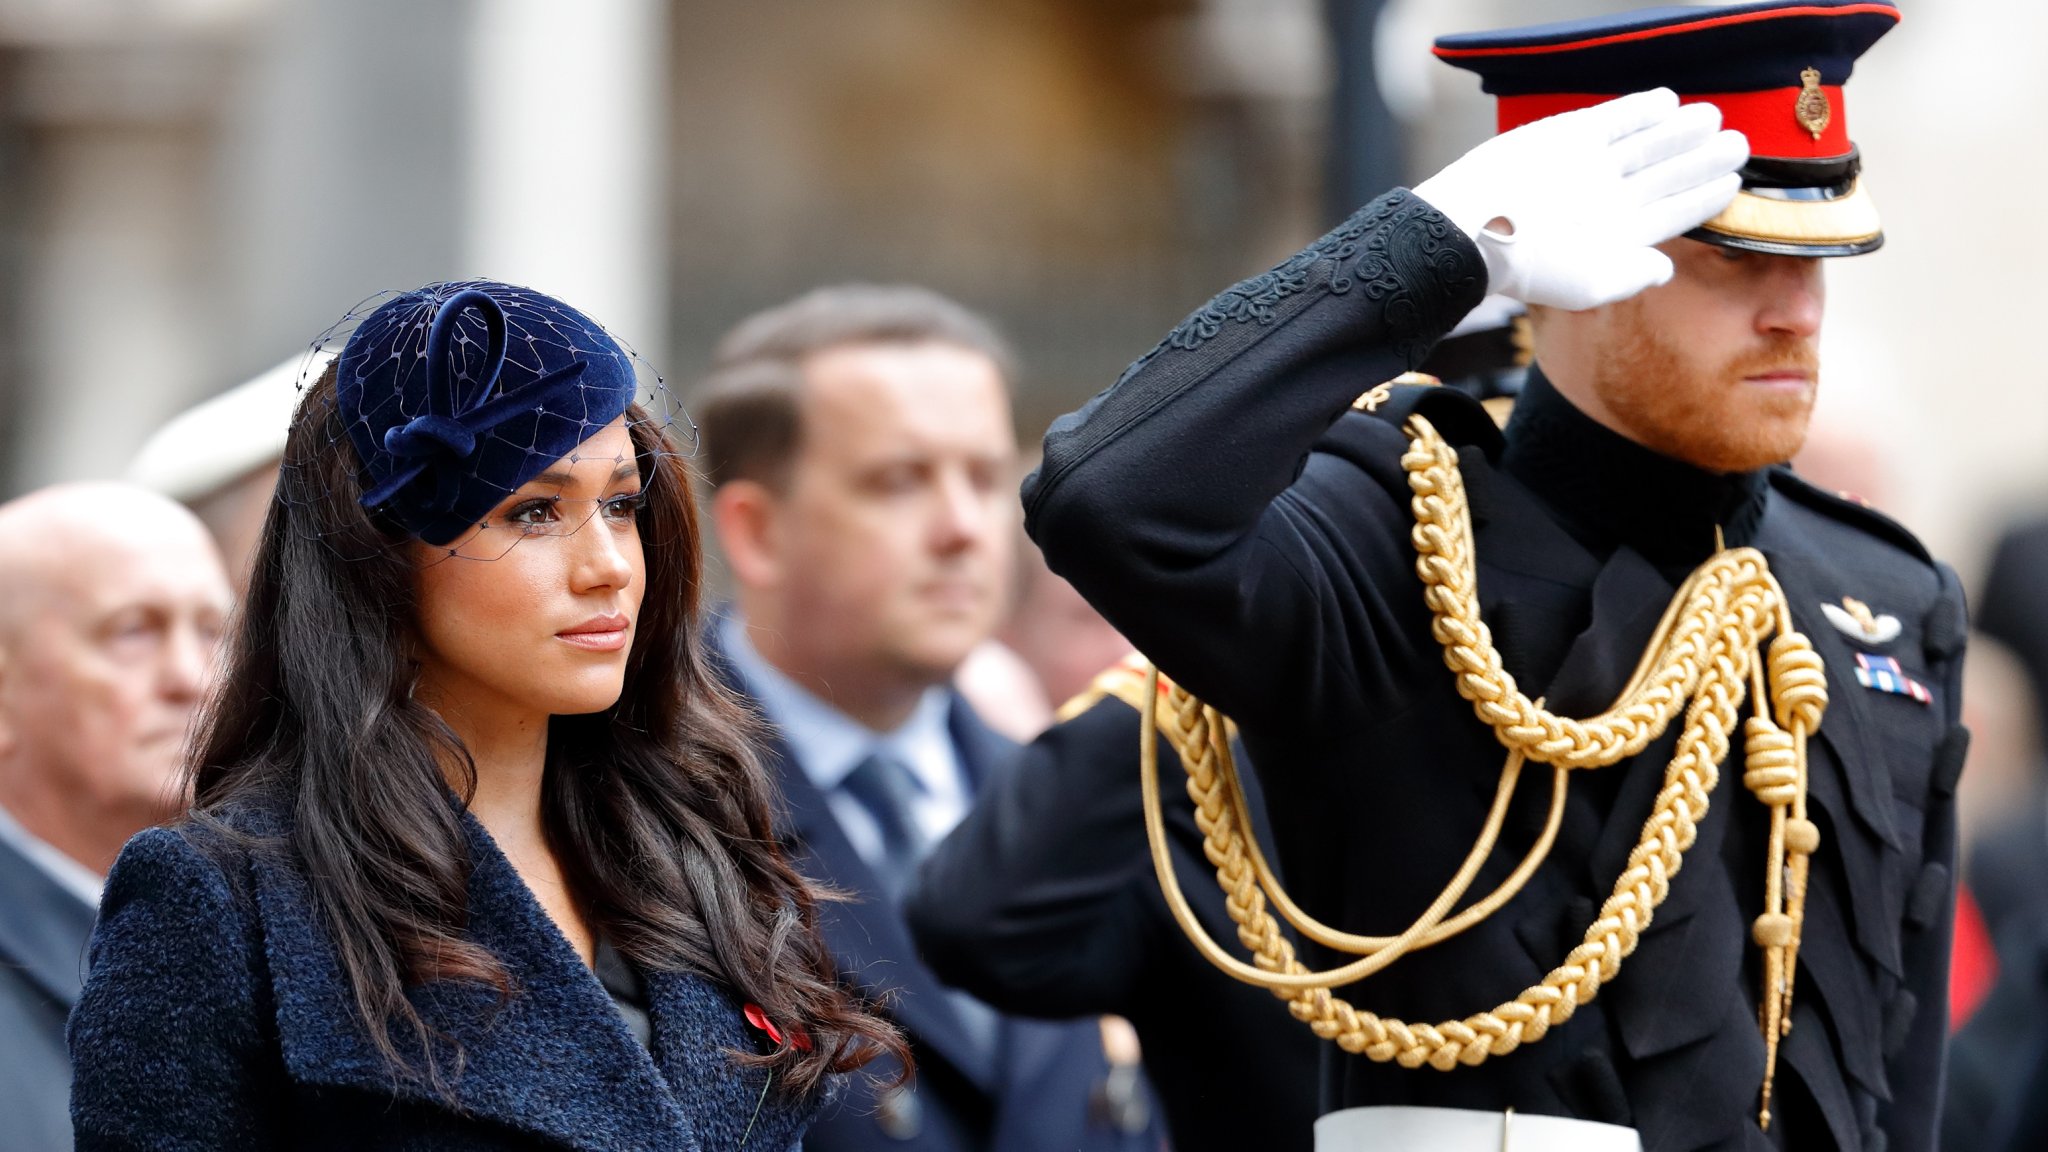 Apparently, Meghan Markle And Prince Harry Felt Forced Out Of The Royal Family